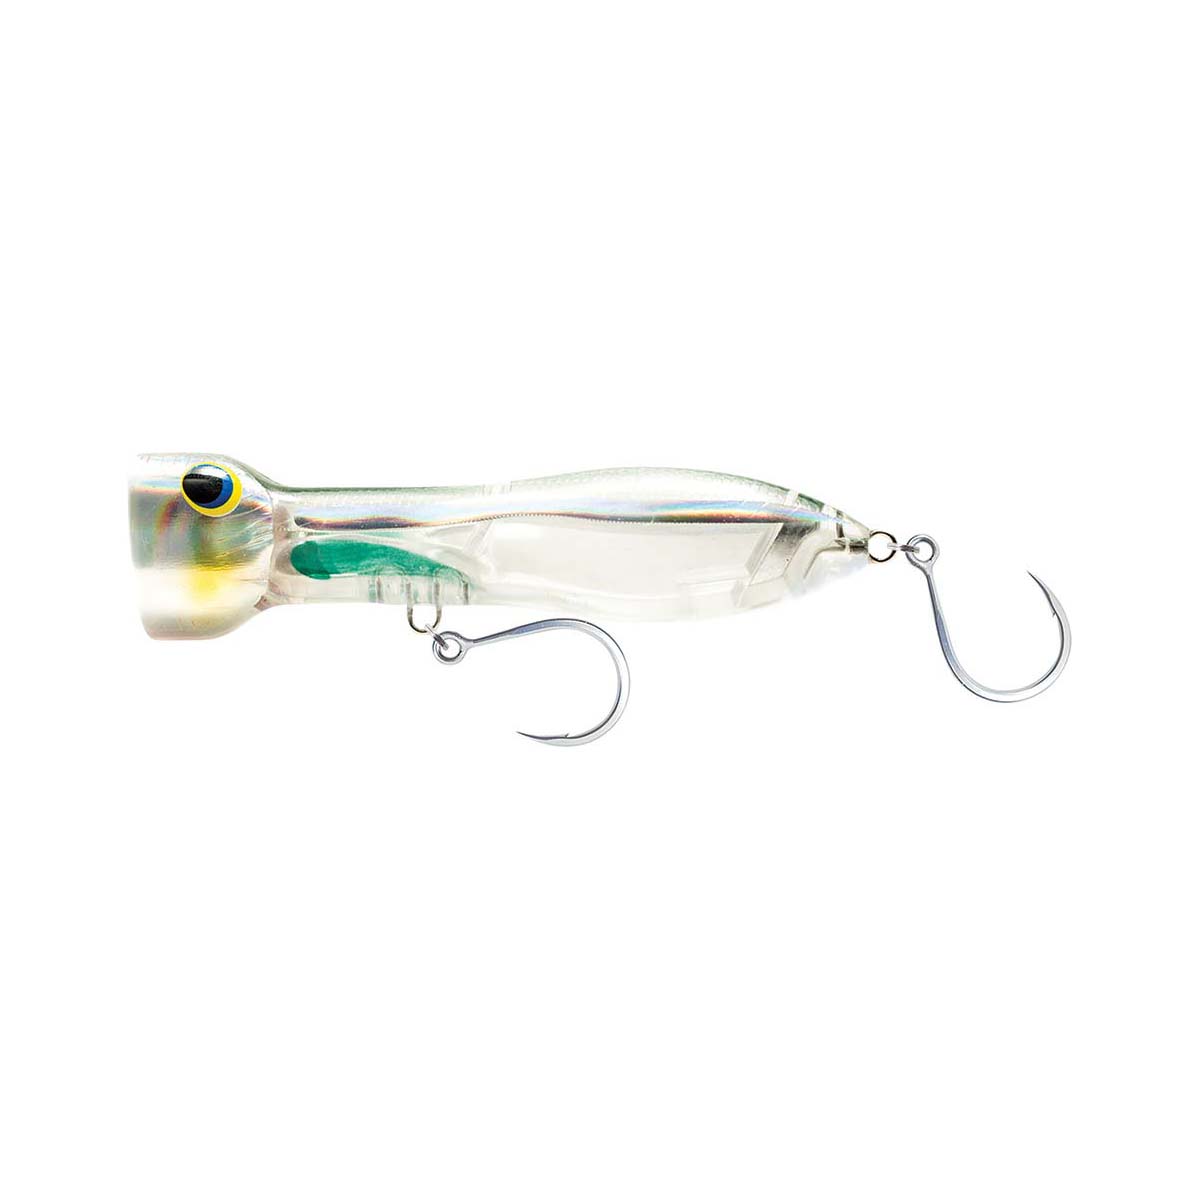 Nomad Chug Norris Surface Popper Lure 12cm Holo Ghost Shad